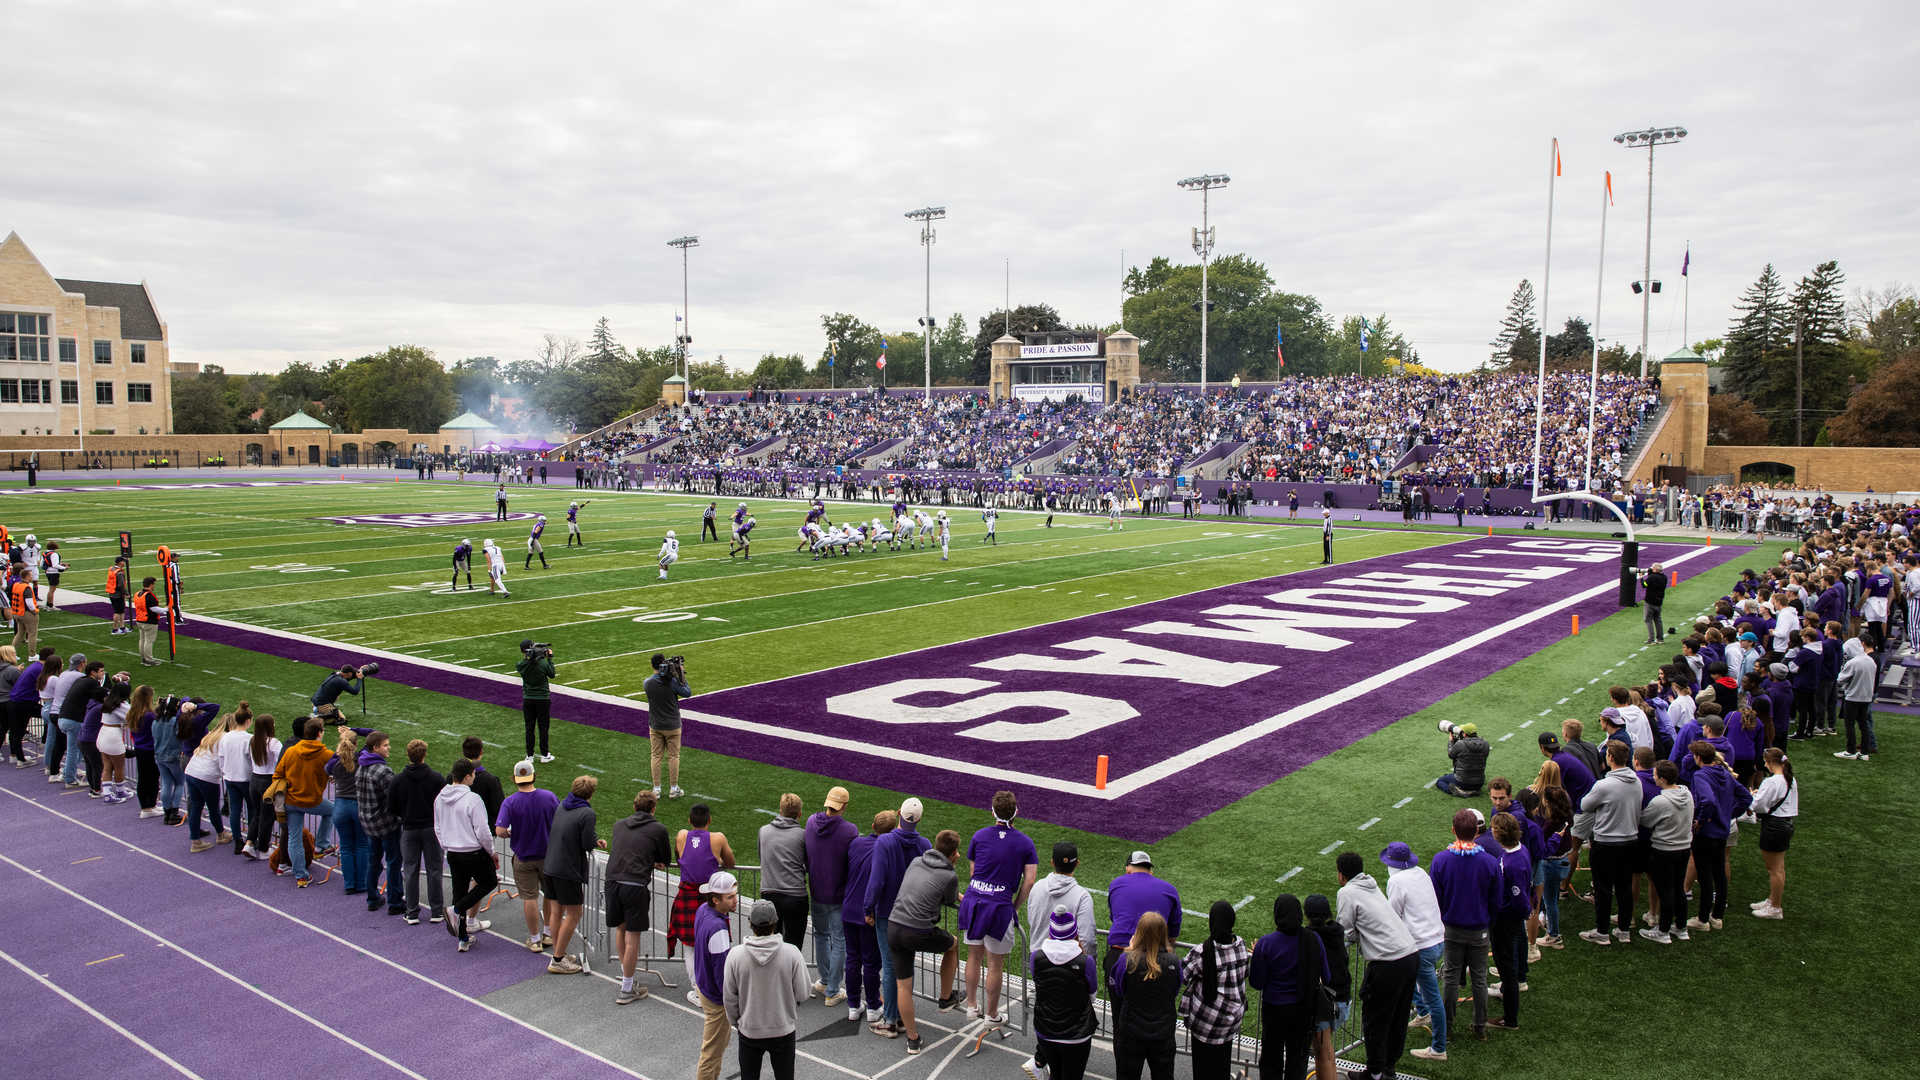 Fans surround the field and fill the stands of O’Shaughnessy Stadium